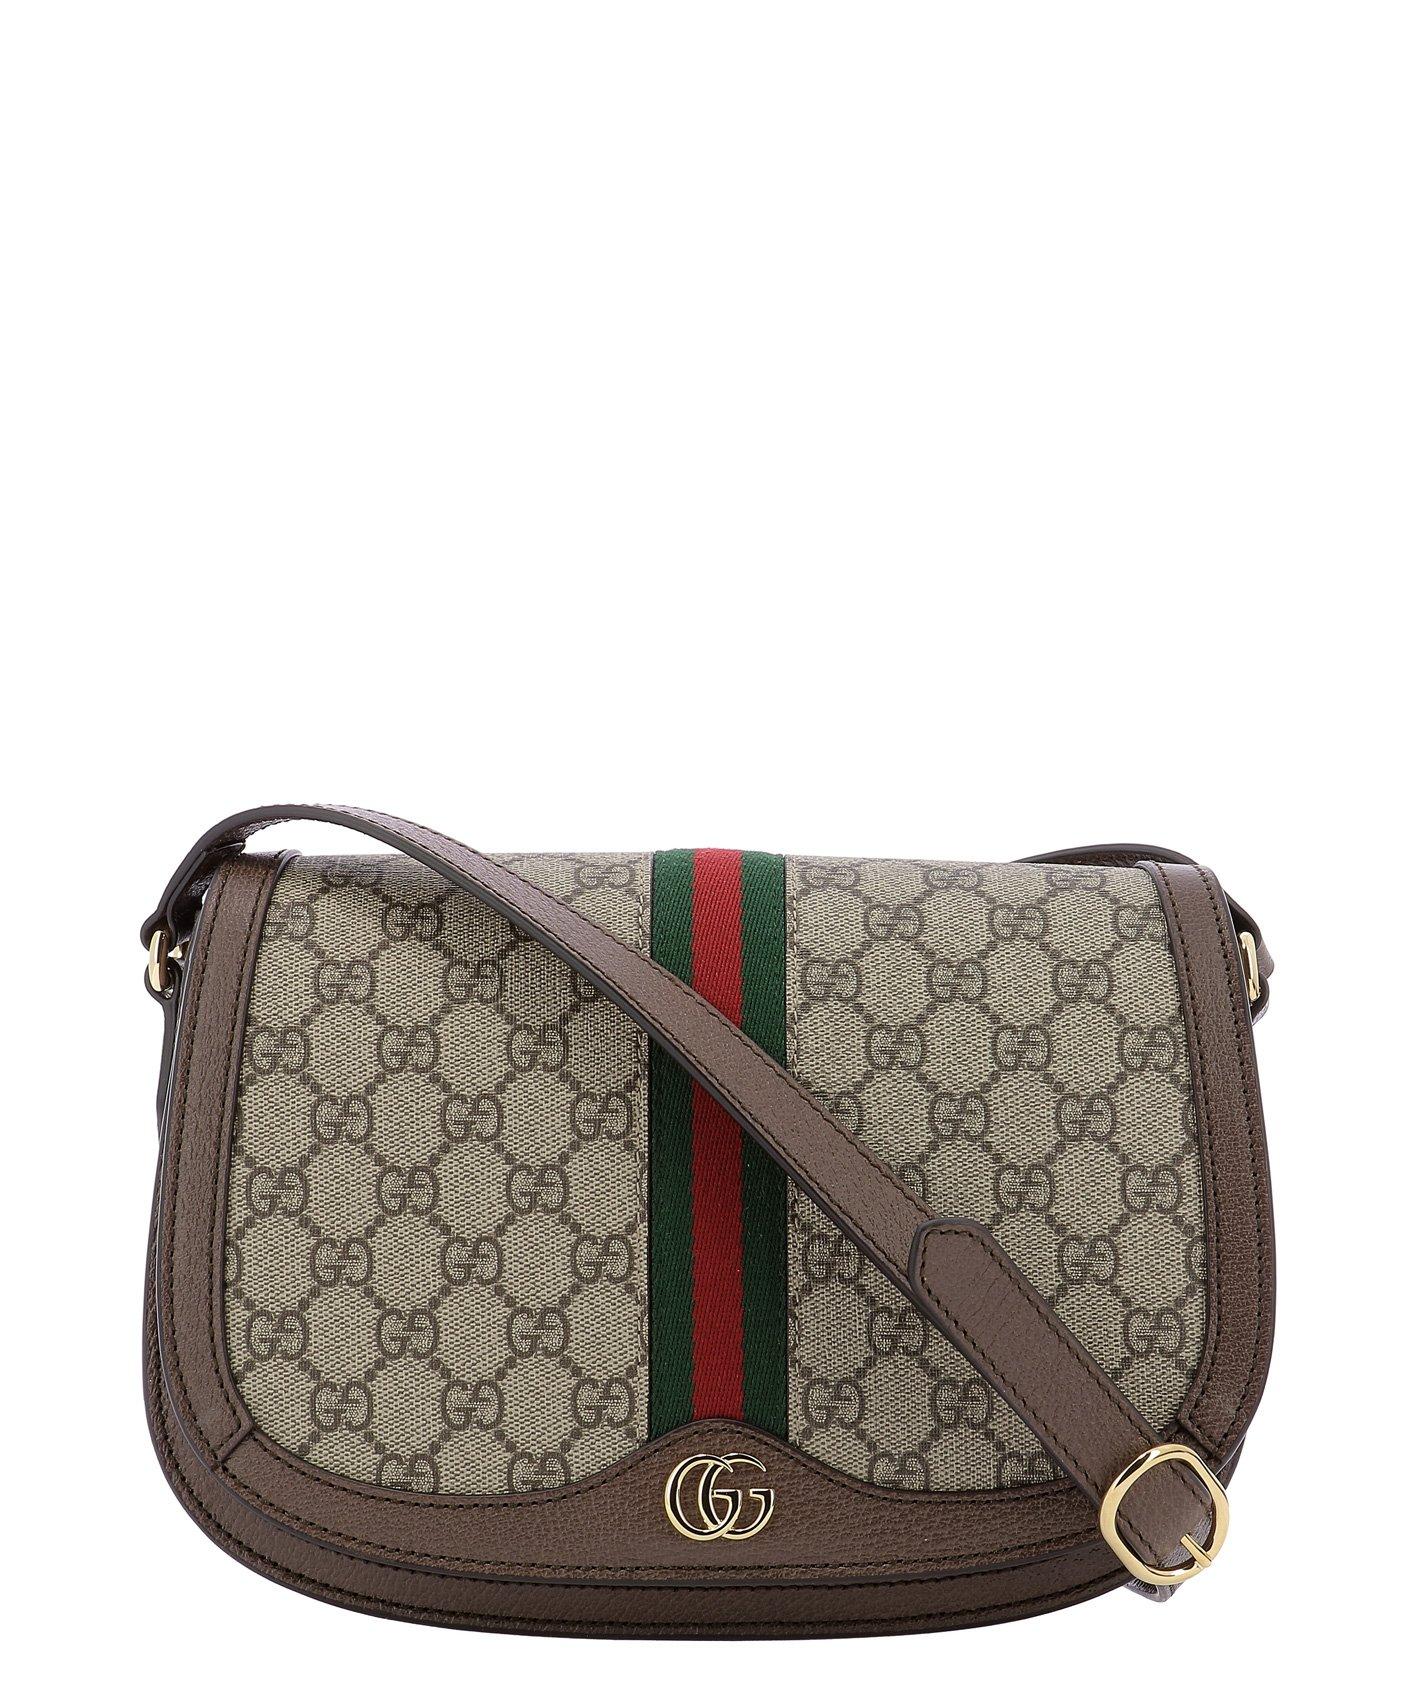 Gucci Ophidia GG Small Shoulder Bag in Natural